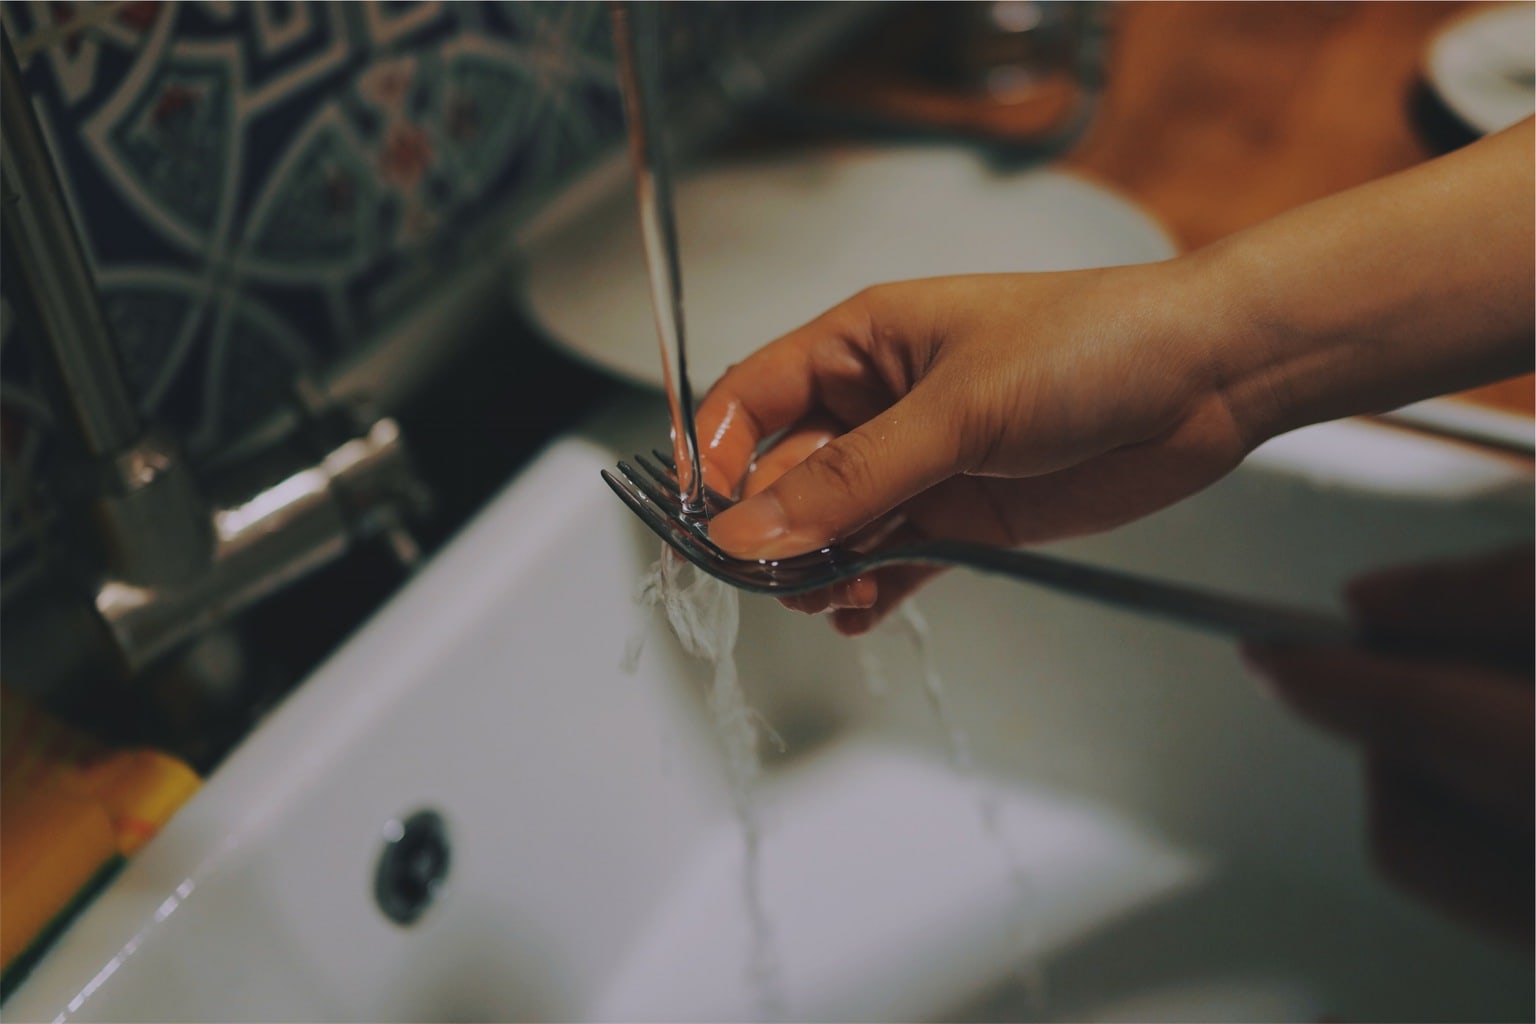 Shot of someone's hand washing a fork in a sink, doing dishes